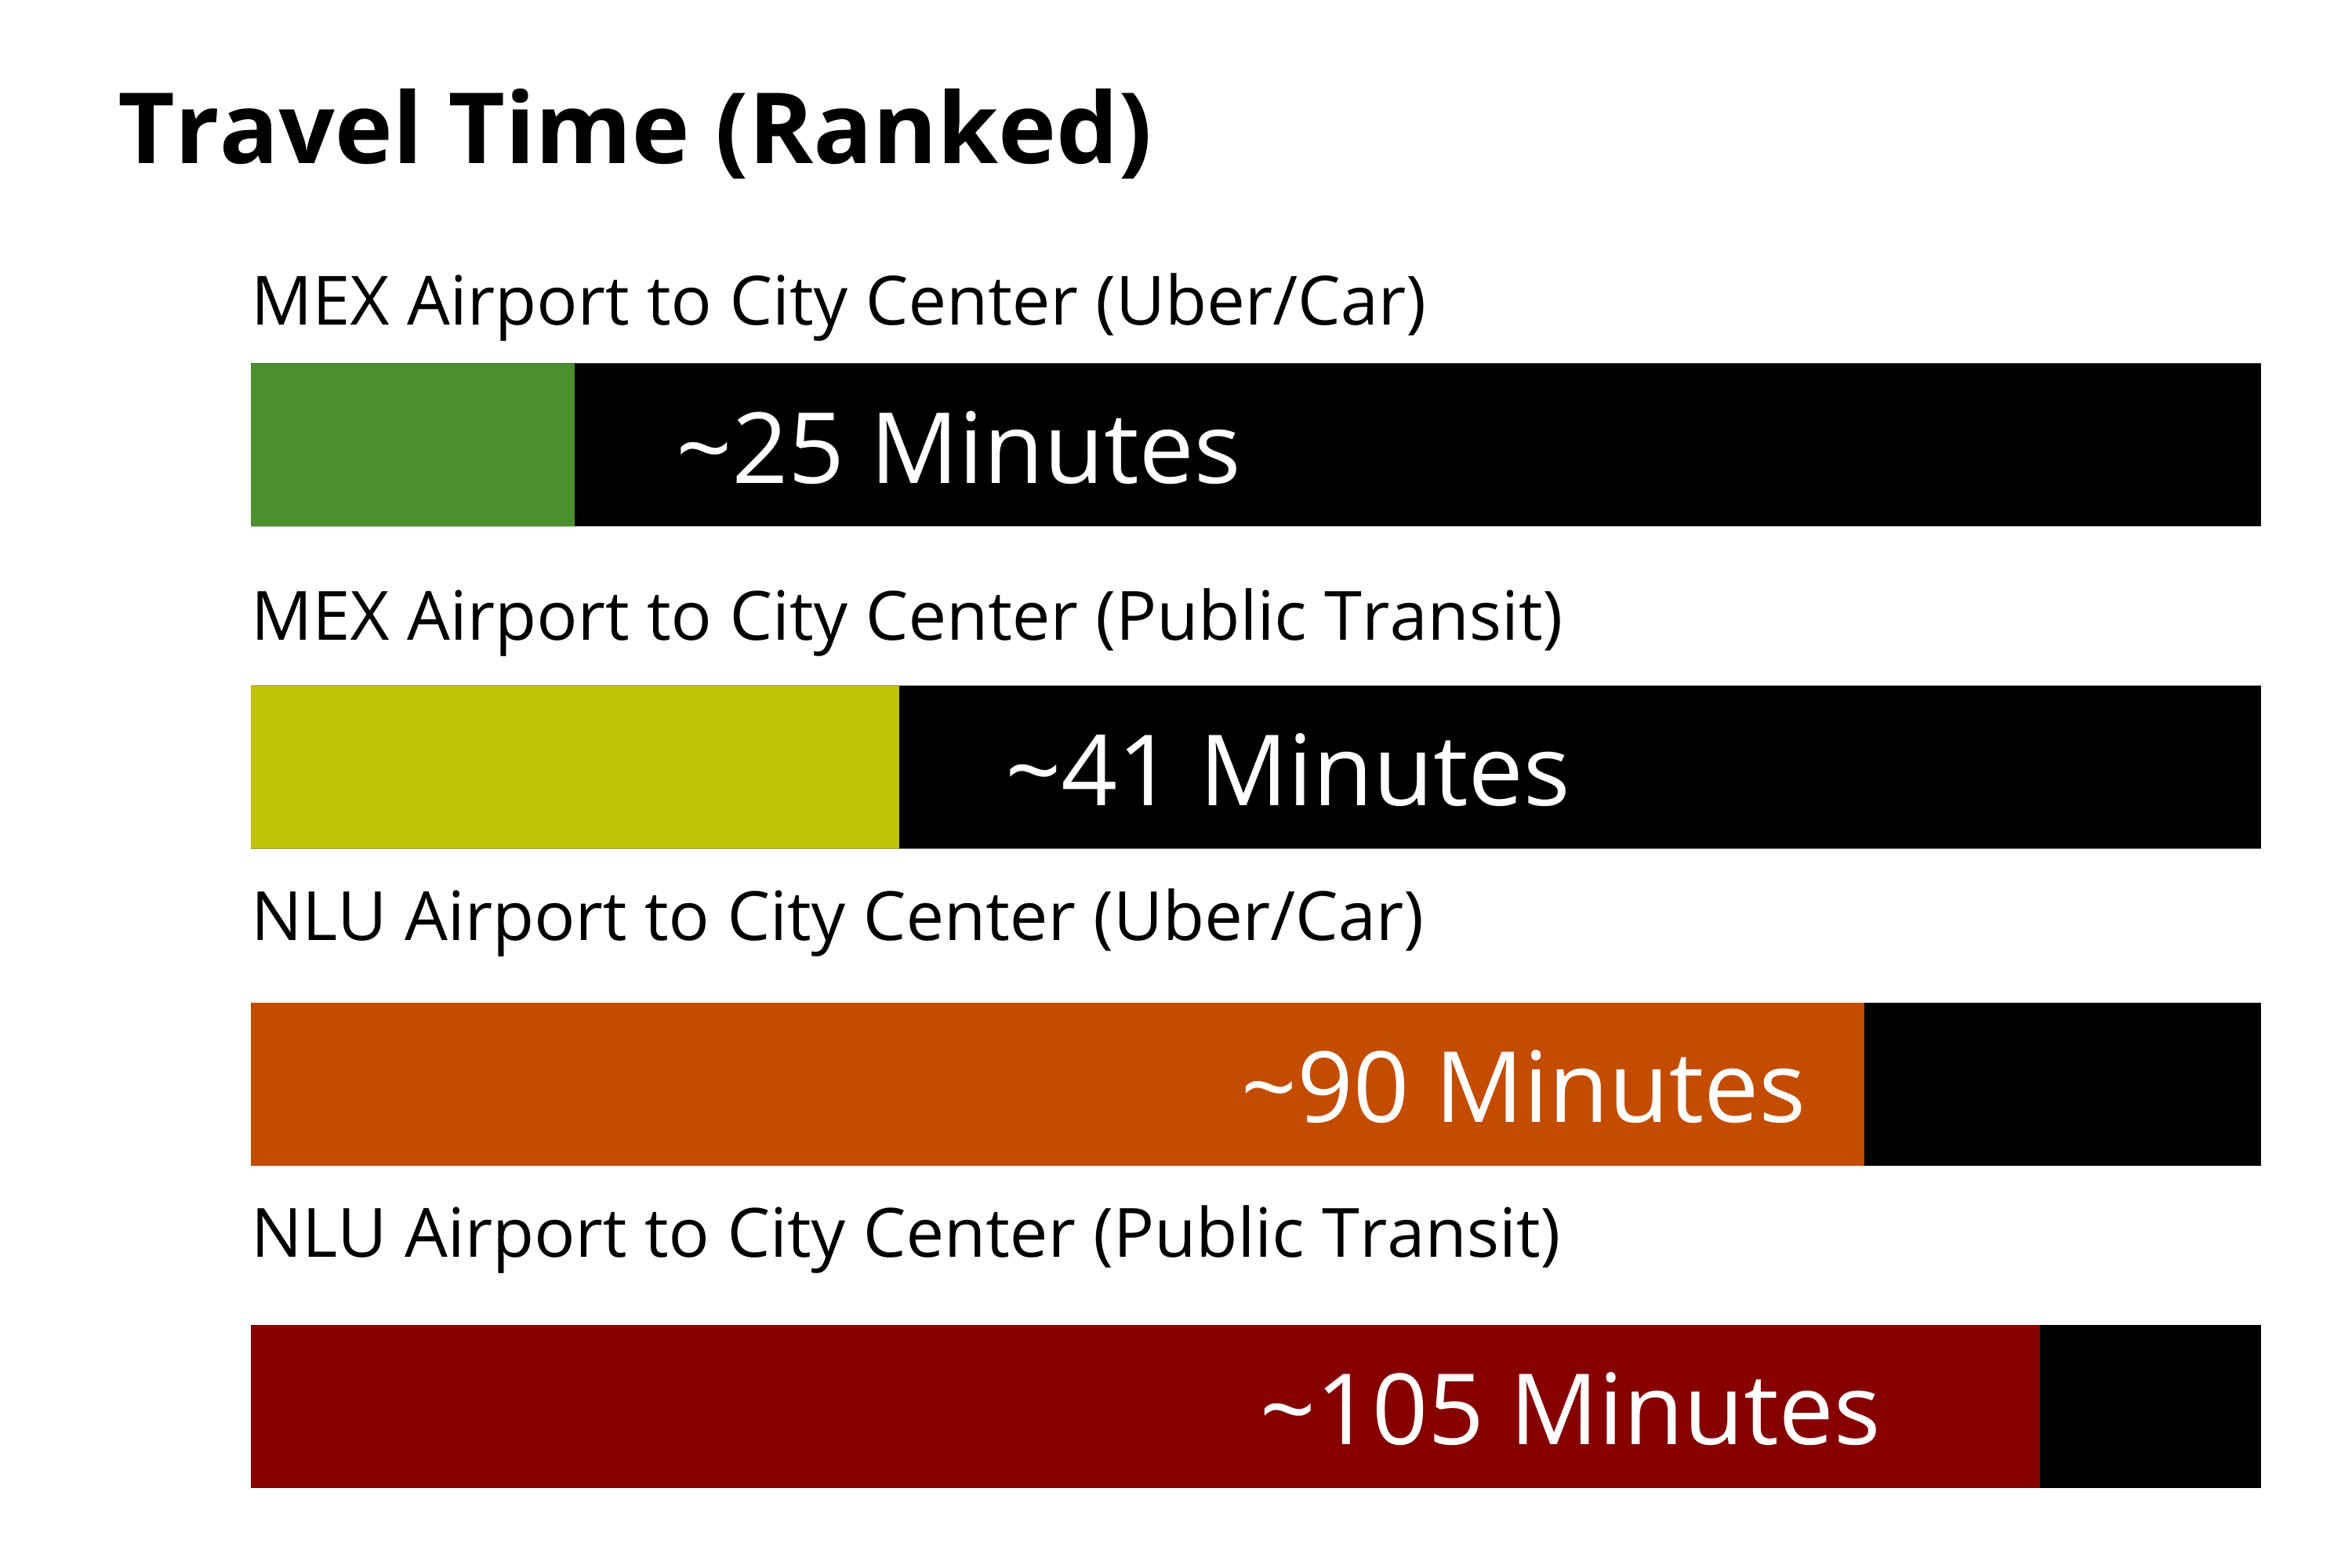 Travel time from Mexico City's current airport compared to the new Mexico City Airport